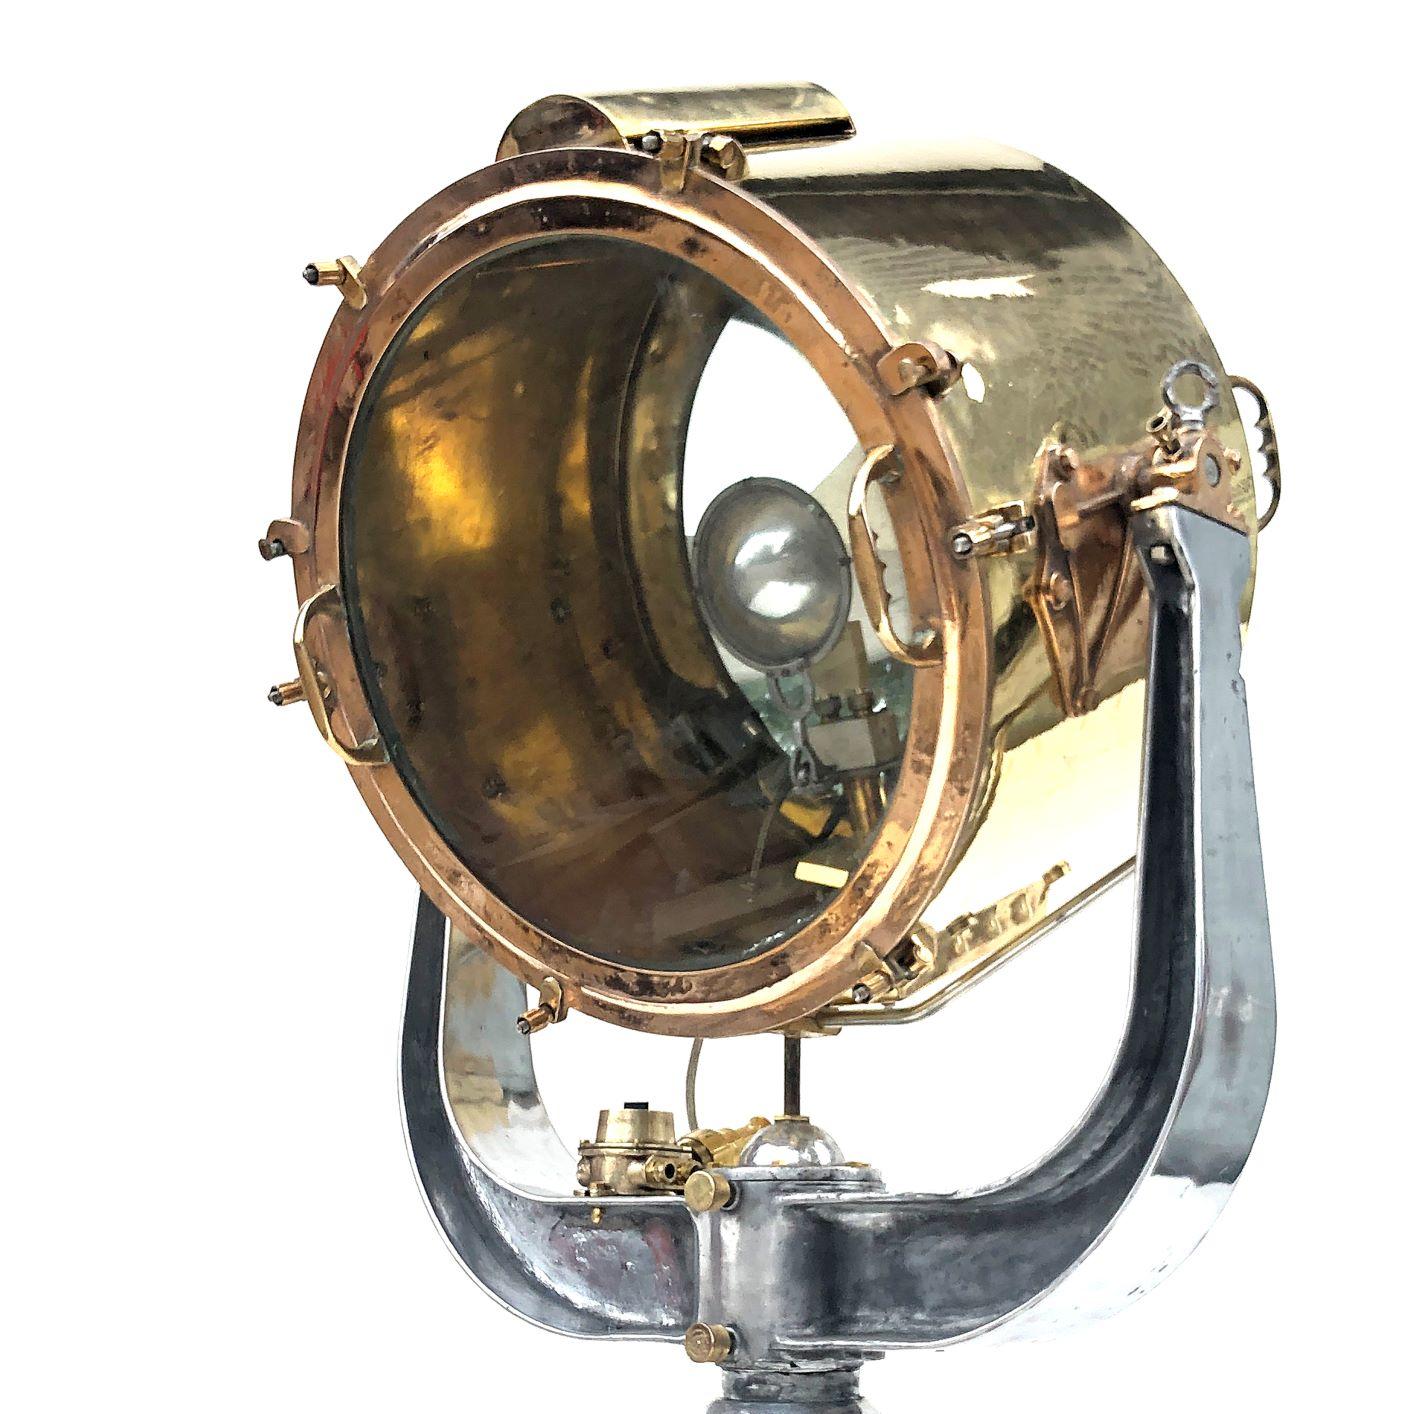 An extremely sought after naval searchlight dated circa 1940 and made by Rotherham's of Coventry, England. Professionally restored by Loomight in the UK ready for modern use.
 
Voltage - 110v or 220v compatible, we will send the correct bulb for